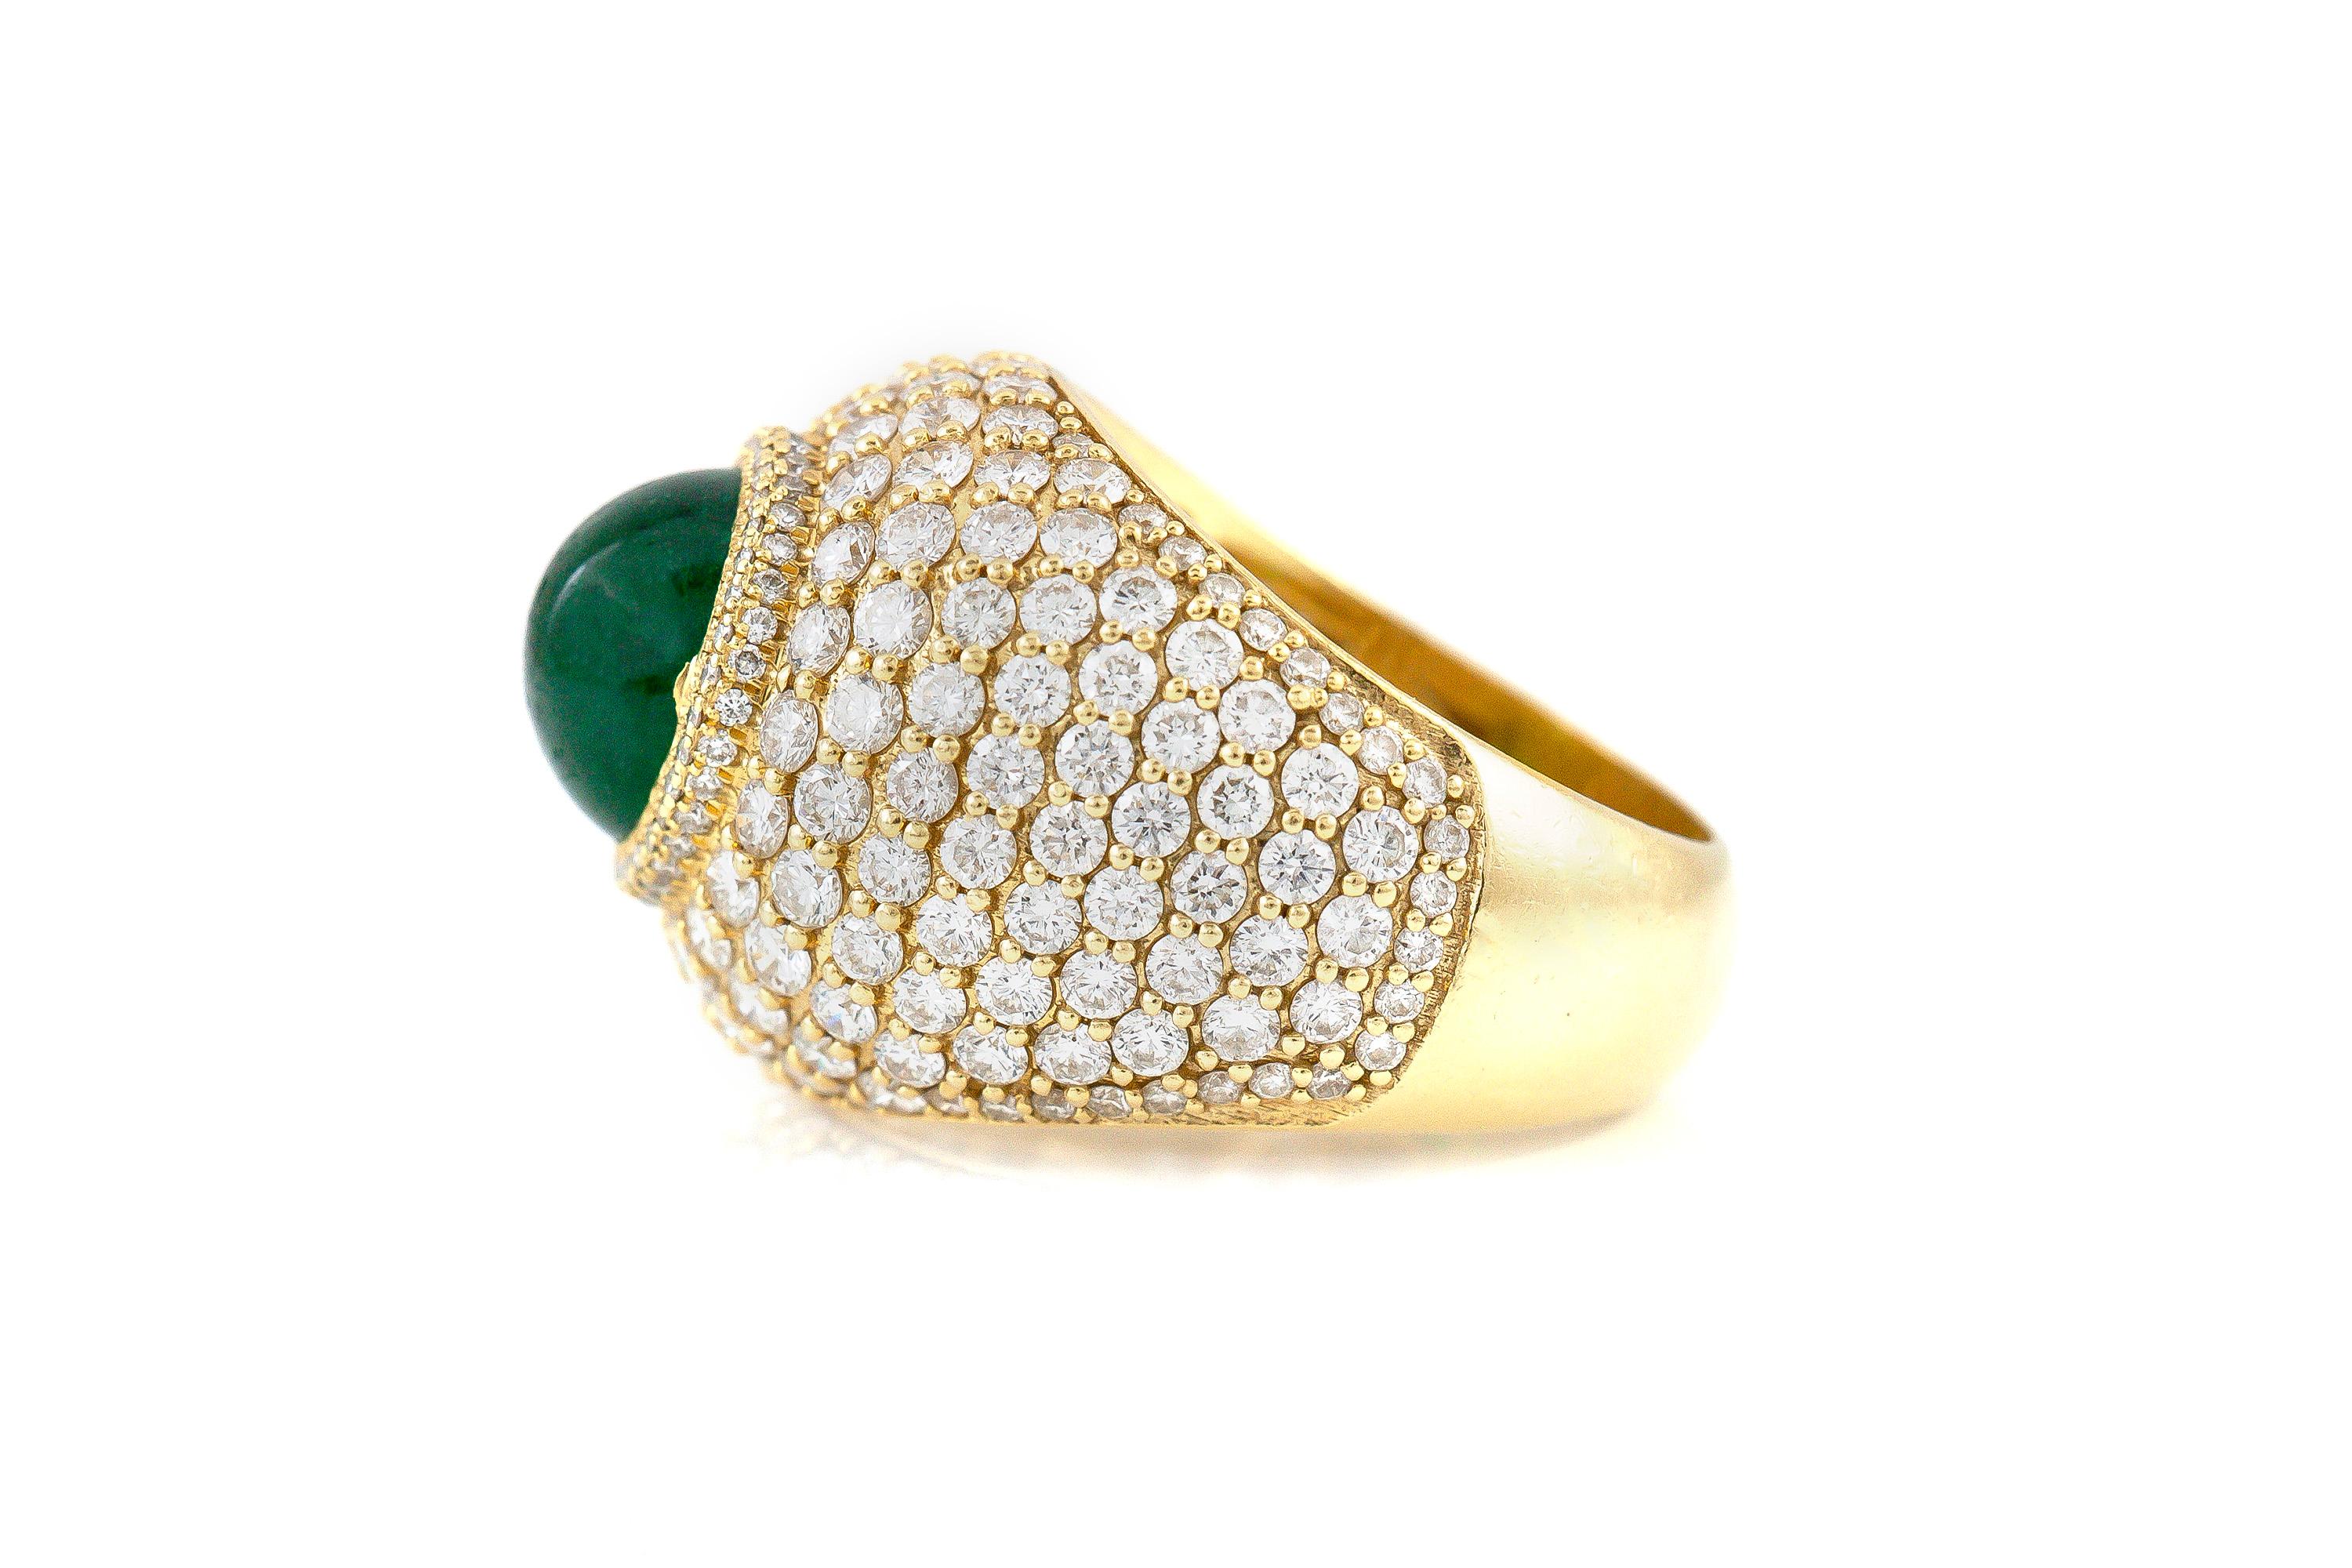 Finely crafted in 18K gold featuring a center cabochon emerald weighing approximately 3.00 carats surrounded by Round-Brilliant cut diamonds weighing a total of approximately 8.00 carats.
Circa 1970.